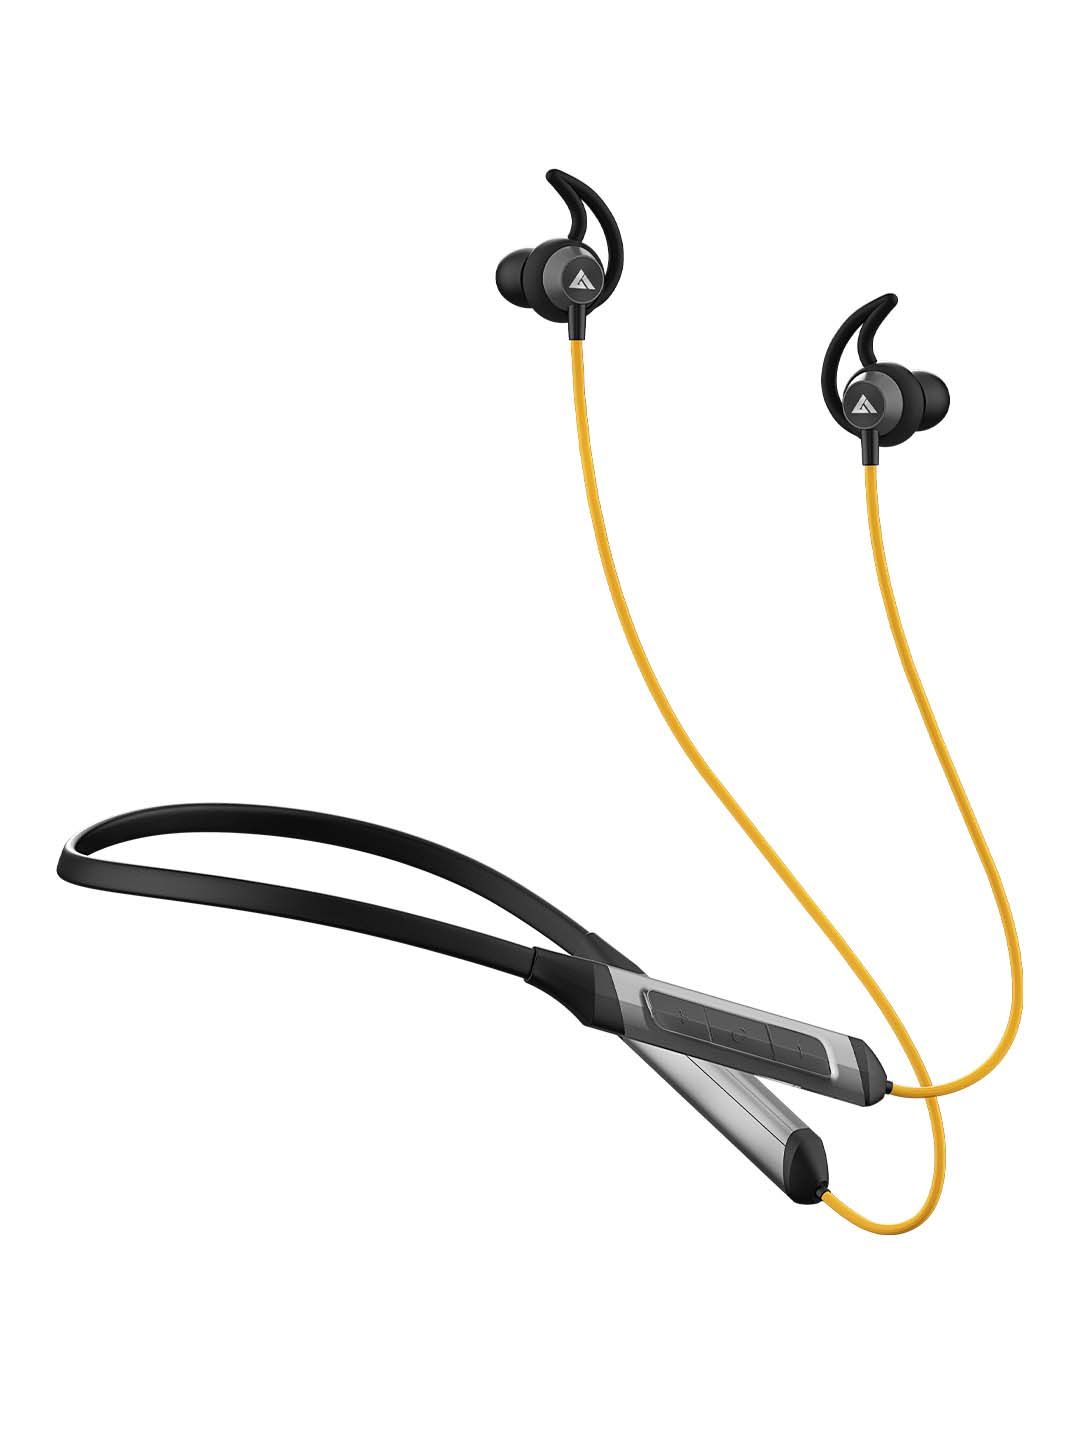 BOULT AUDIO ProBass XCharge In-Ear Wireless Bluetooth Earphones - Yellow Price in India